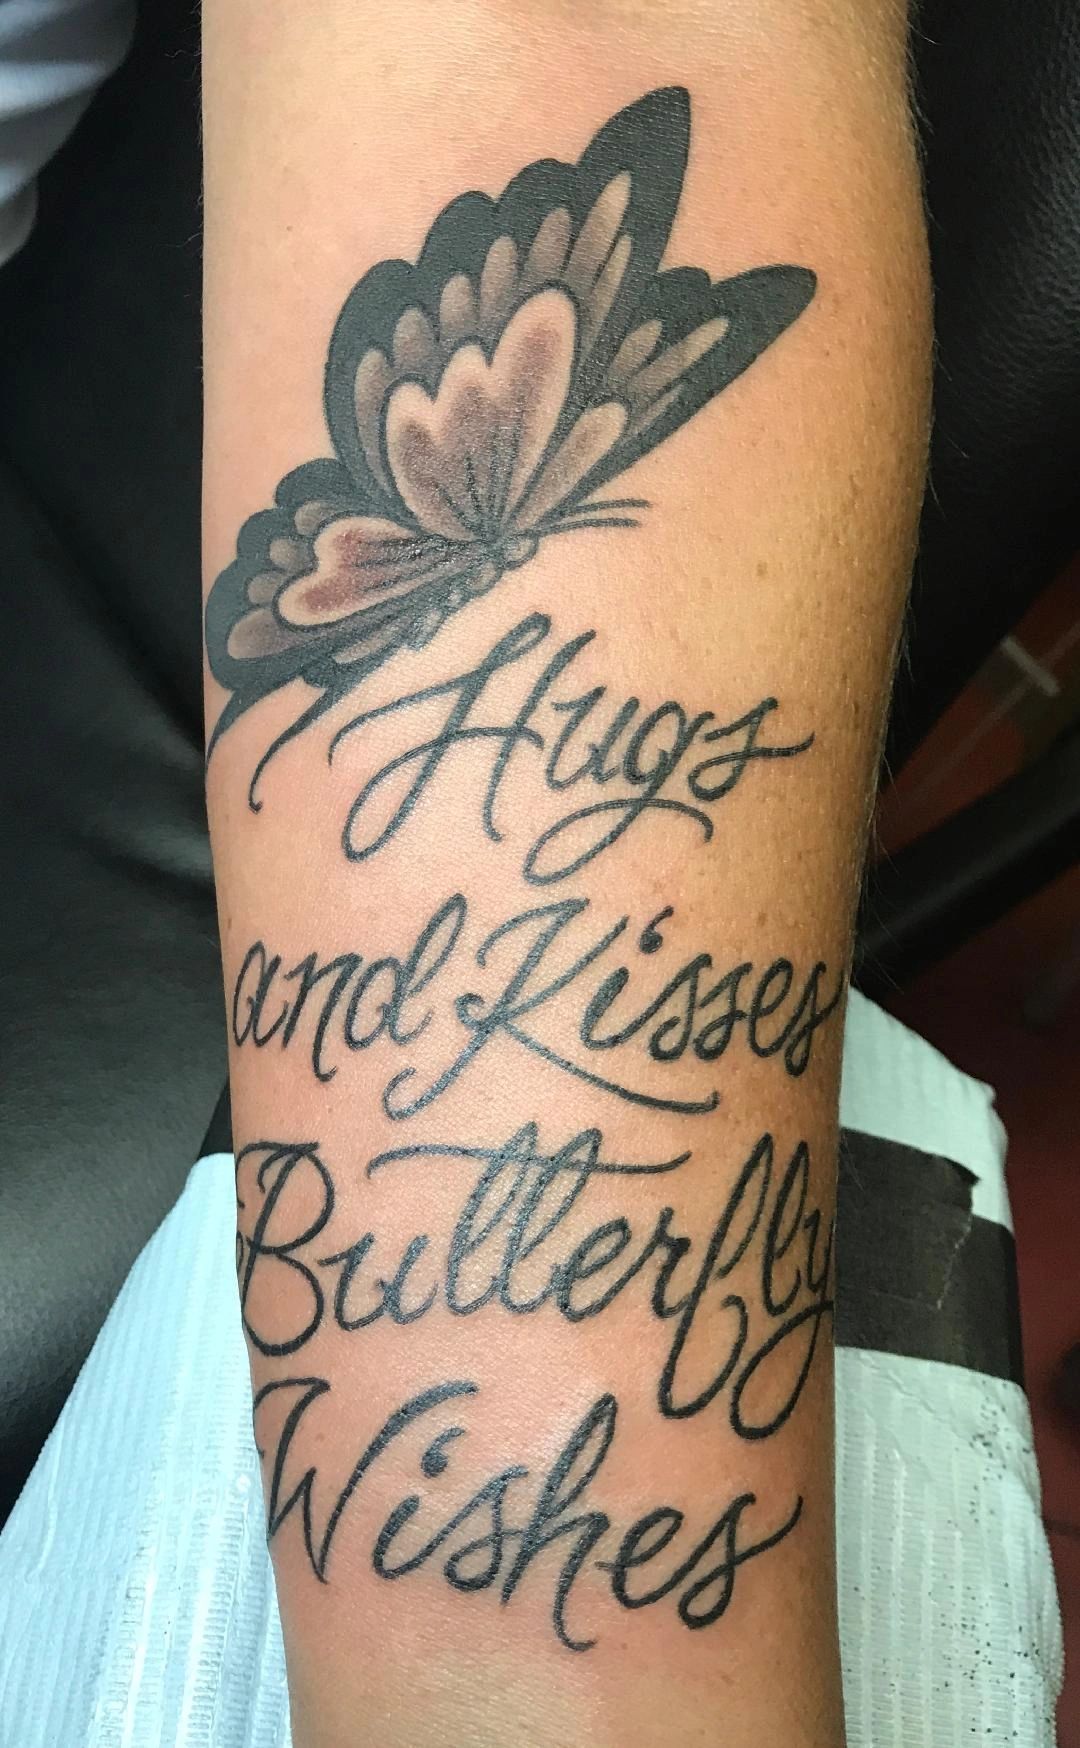 Butterfly with script by Jamie Cooley at Red 13 Tattoo Knoxville  Tennessee  rtattoos